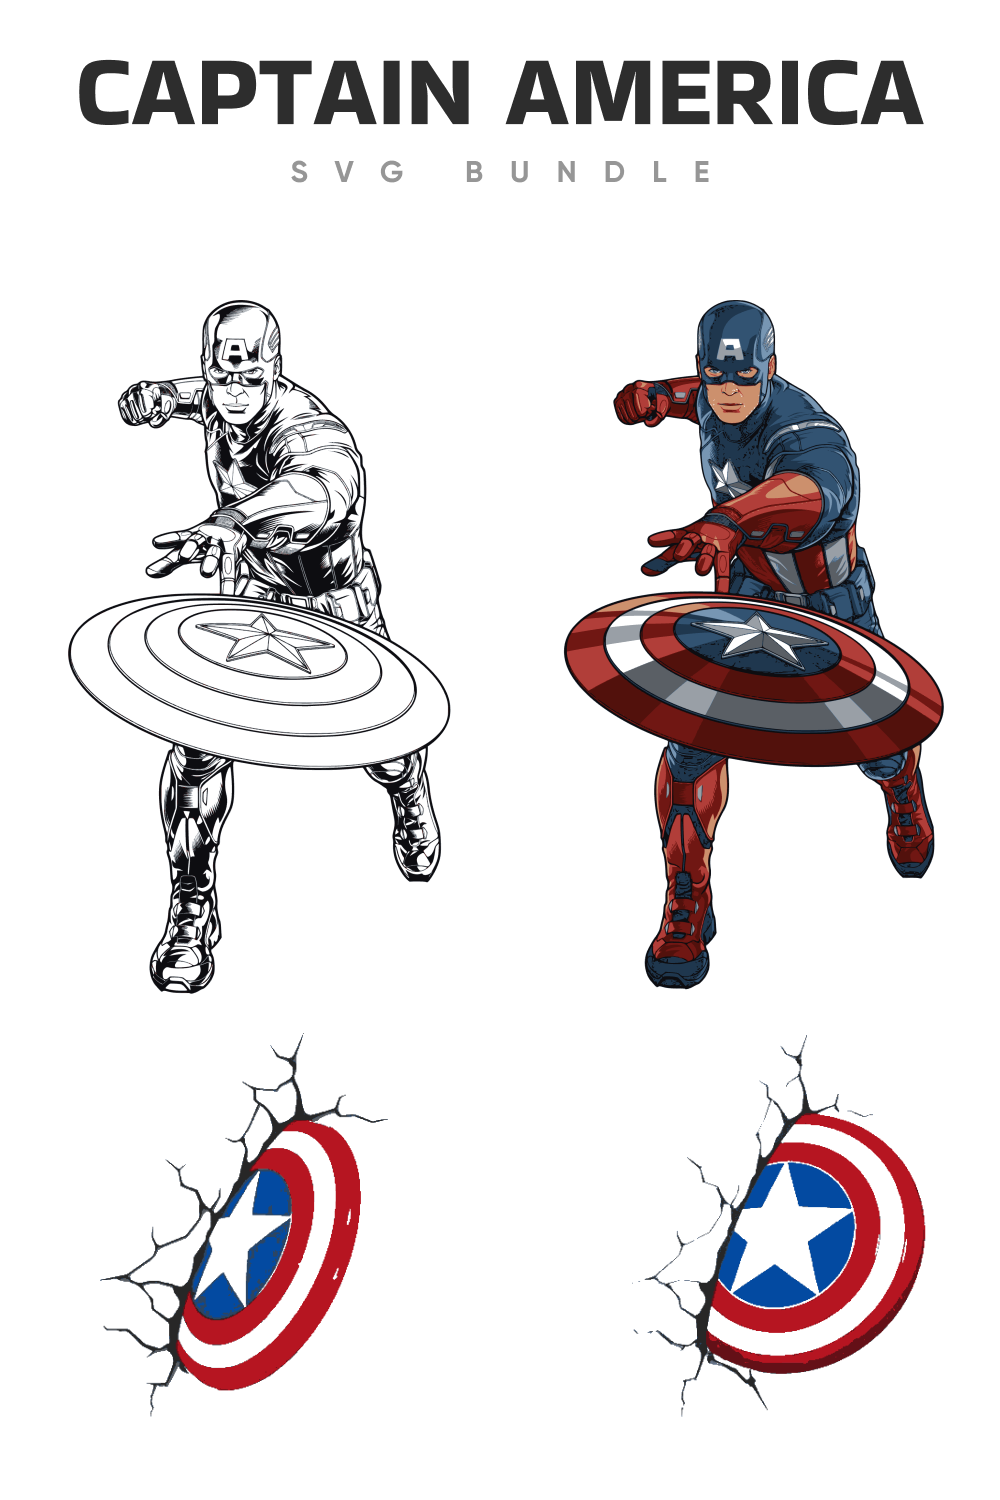 Classic Captain America charachters.